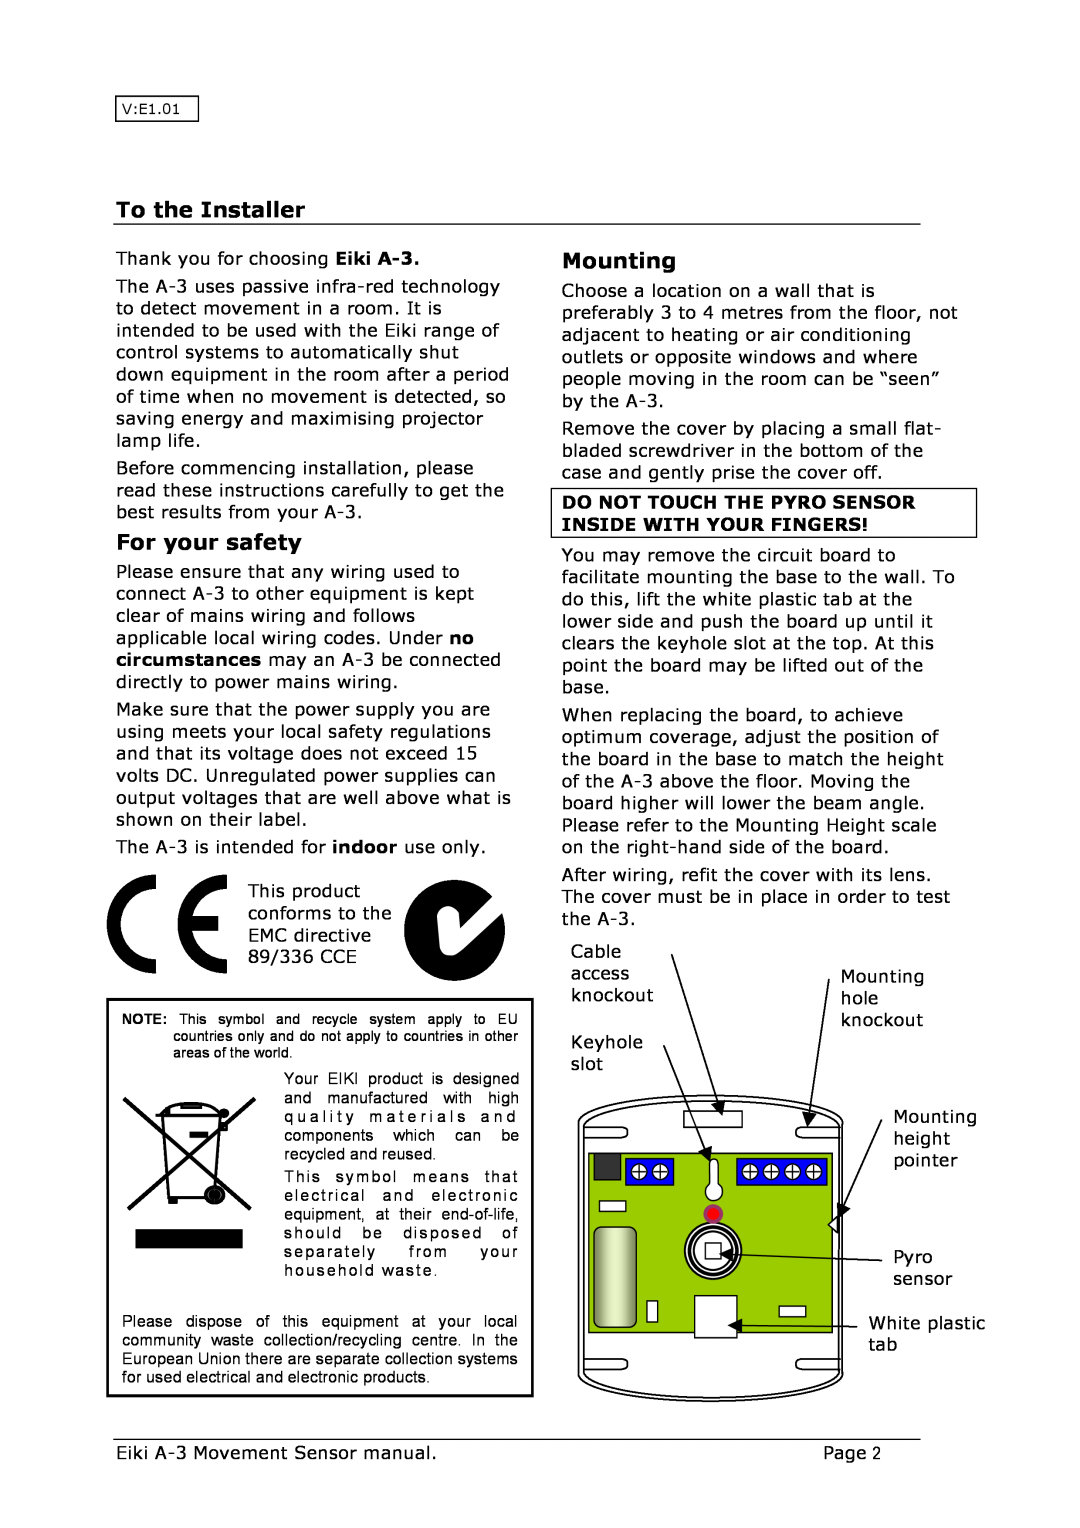 Eiki instruction manual To the Installer, Mounting, For your safety, Thank you for choosing Eiki A-3 